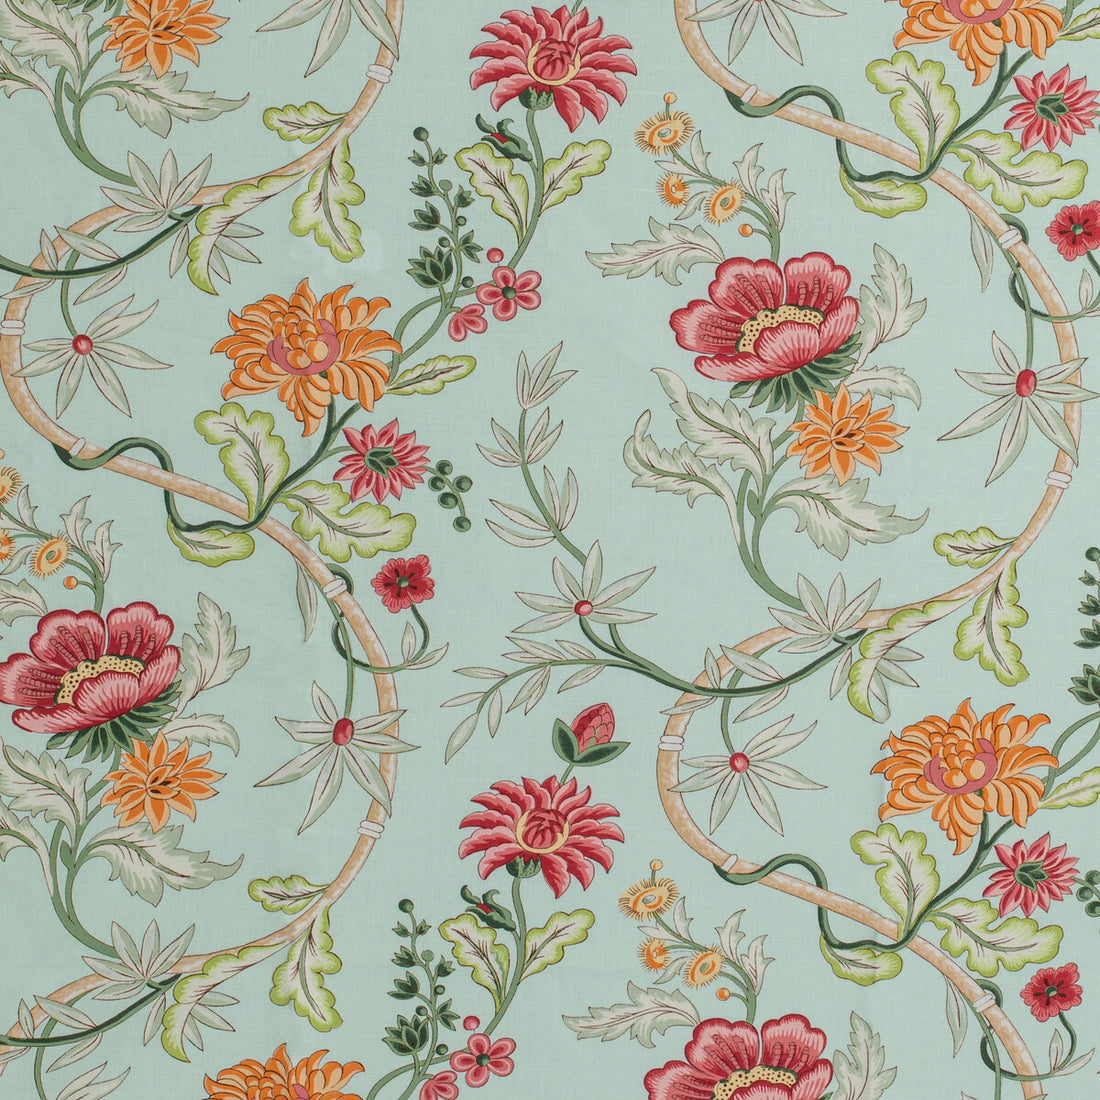 Veronique Print fabric in opal color - pattern 8020122.1537.0 - by Brunschwig &amp; Fils in the Louverne collection